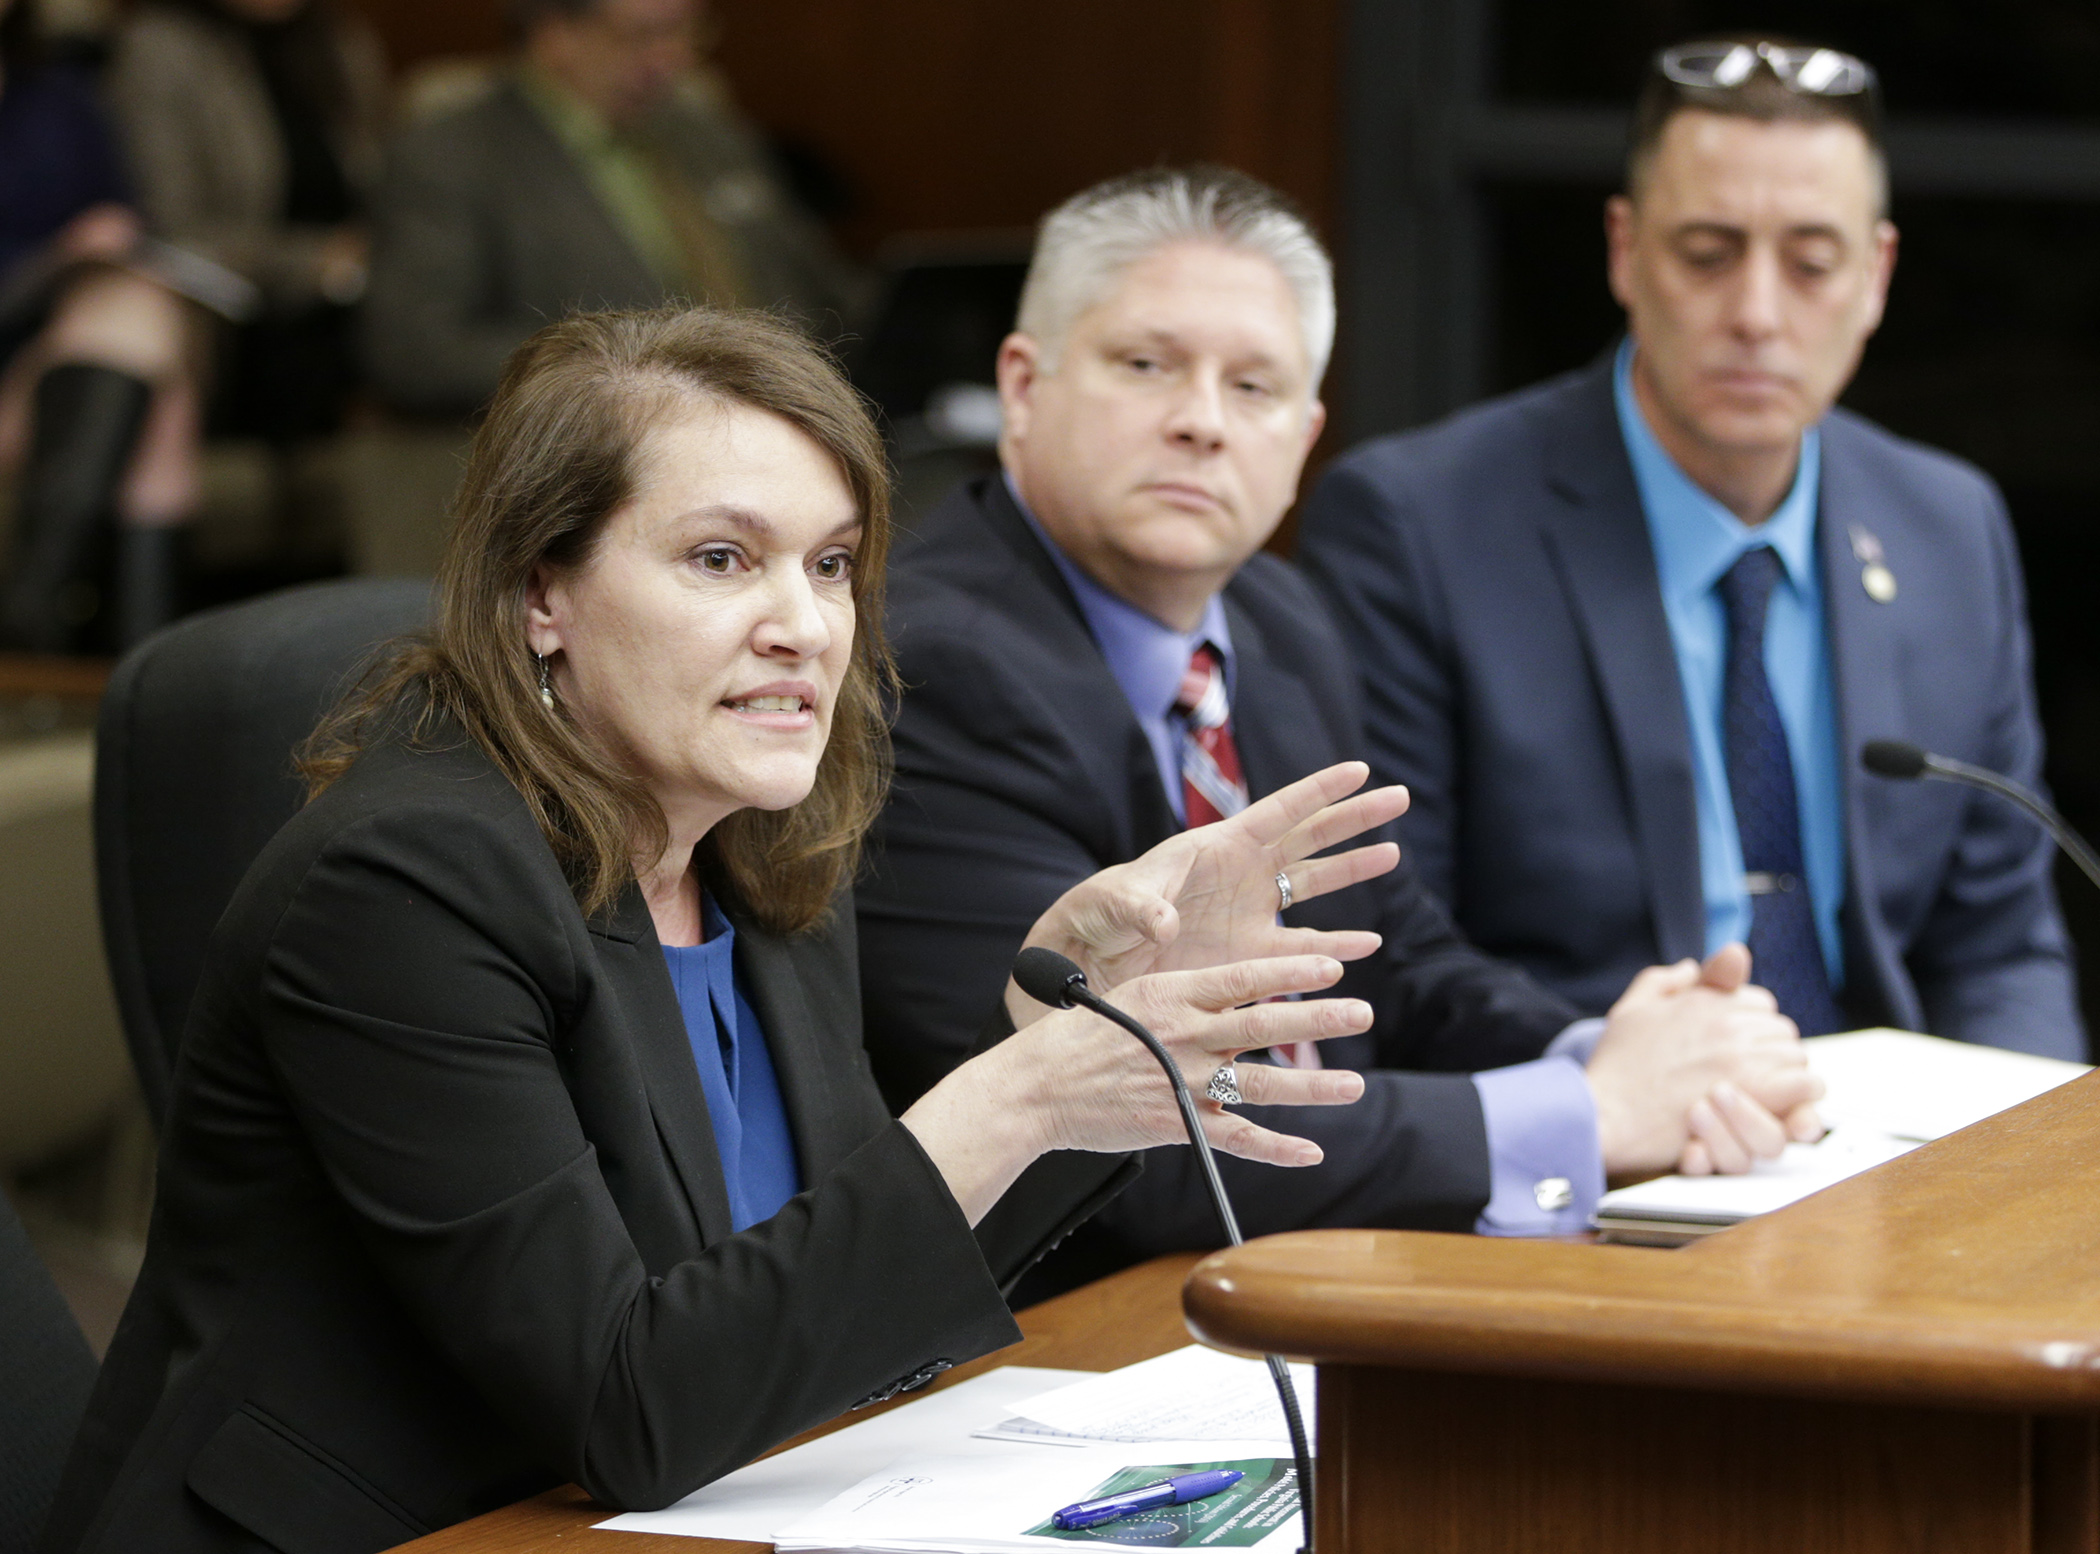 Threat assessment expert Kristine Kienlen testifies March 13 before the House Education Innovation Policy Committee on HF3370, sponsored by Rep. Keith Franke, right, requiring school districts to establish threat assessment teams. Photo by Paul Battaglia. 